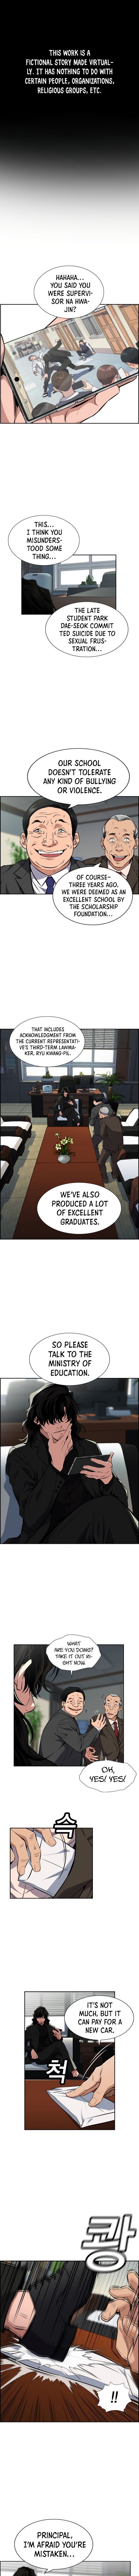 True Education Chapter 2 page 2